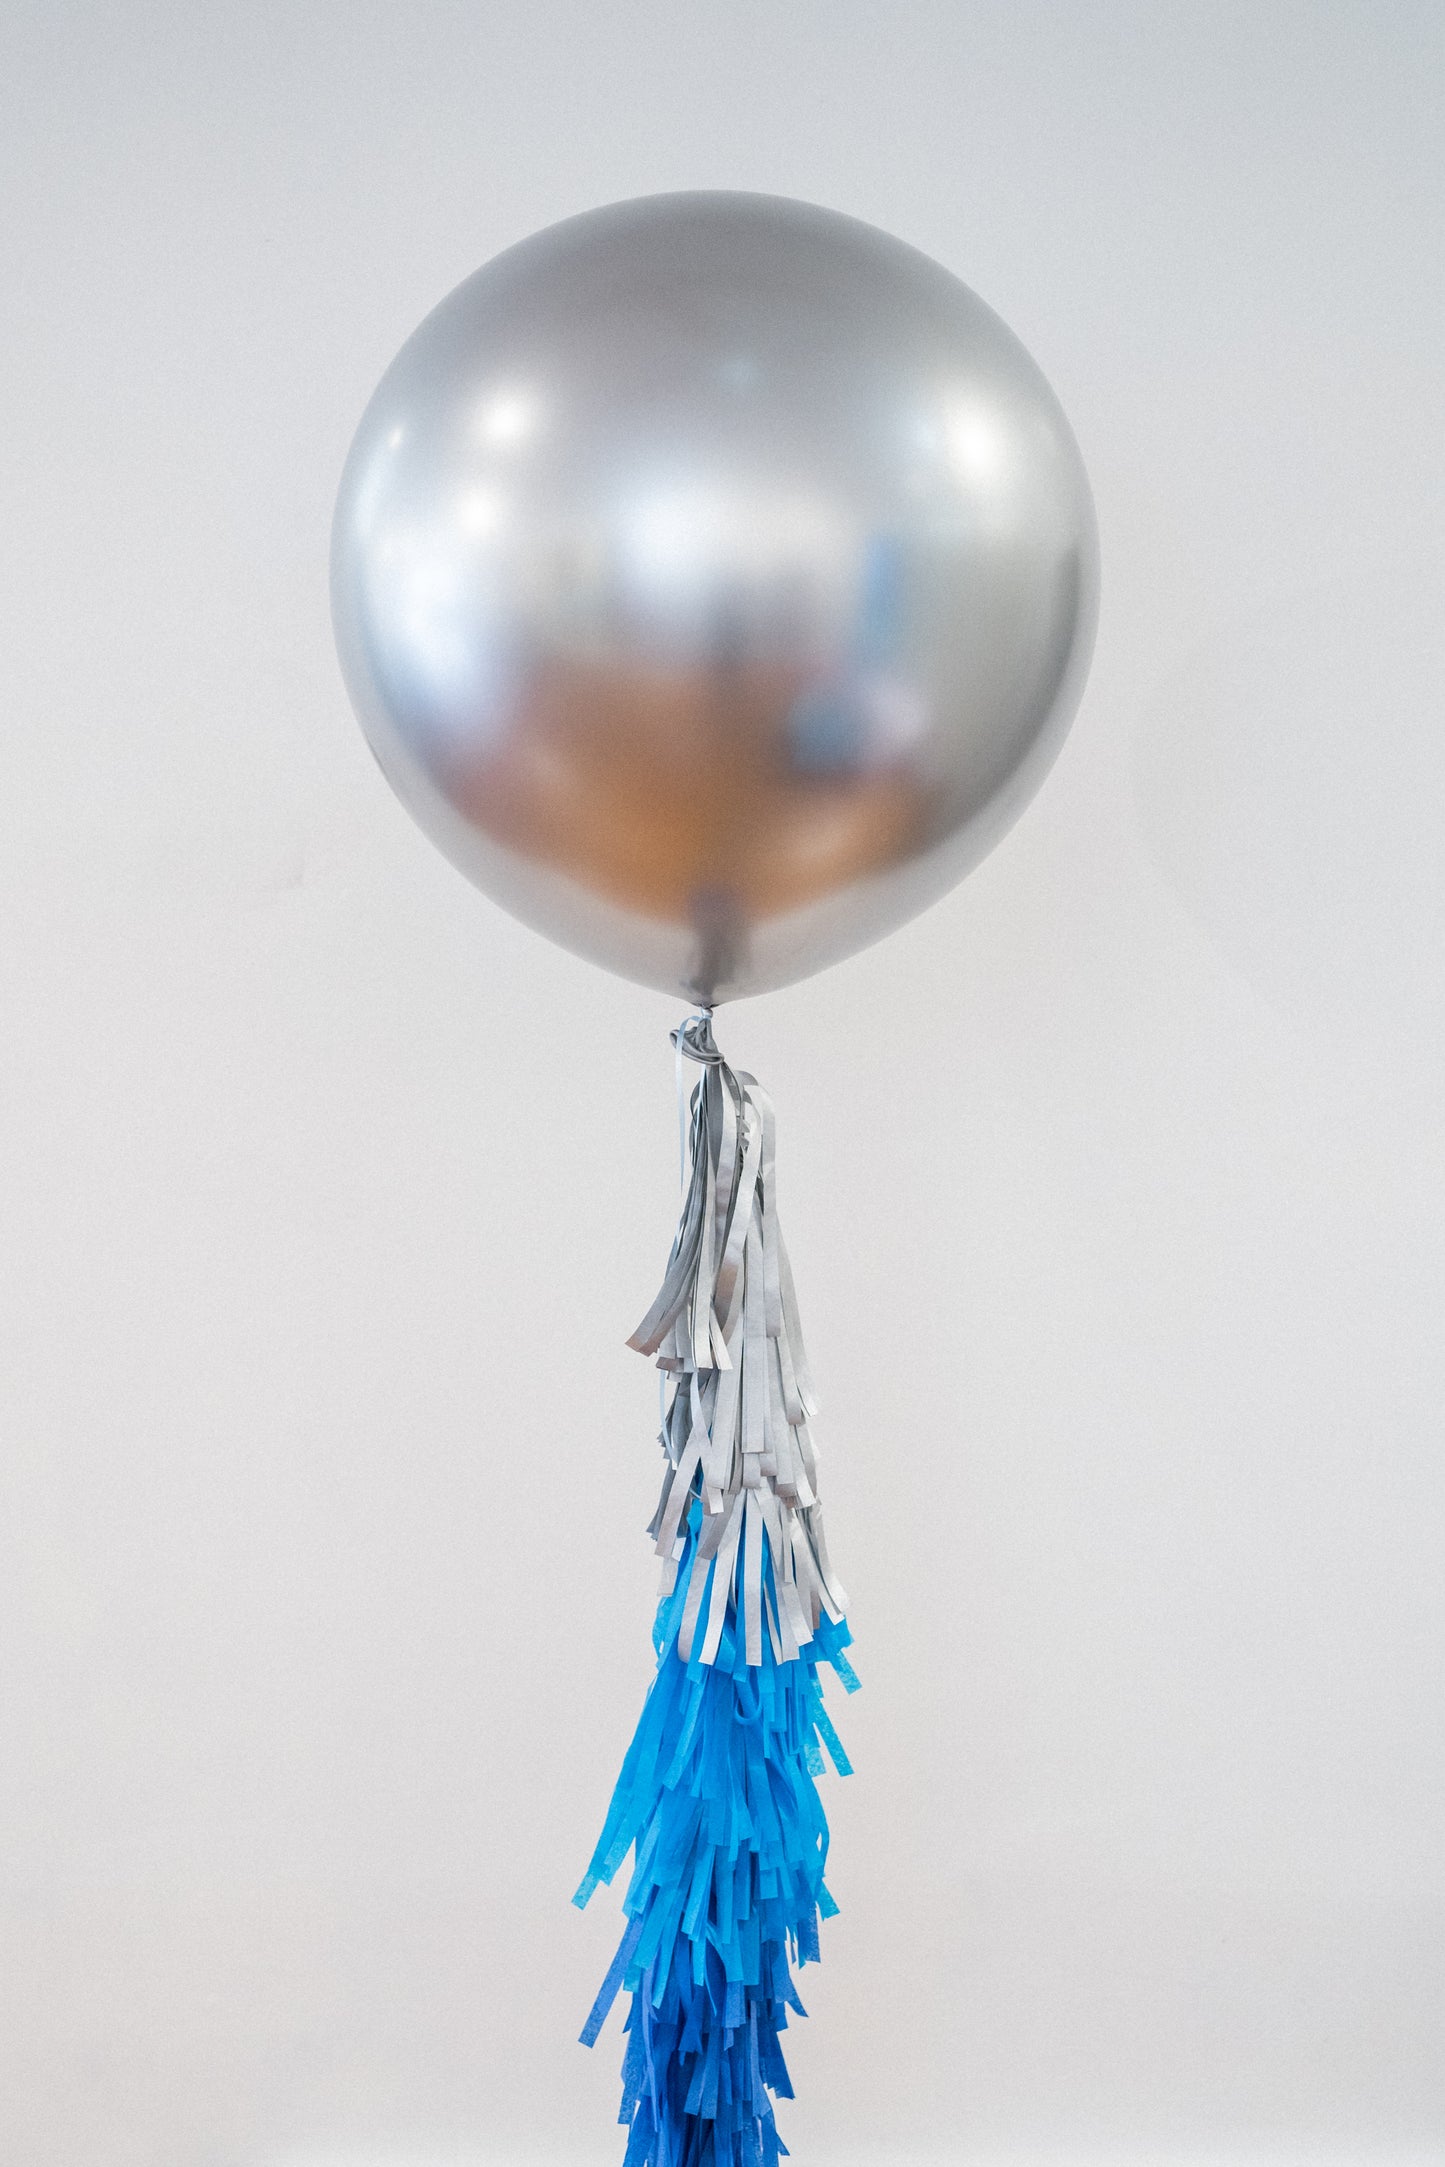 24" Giant Latex Balloons with Tassels